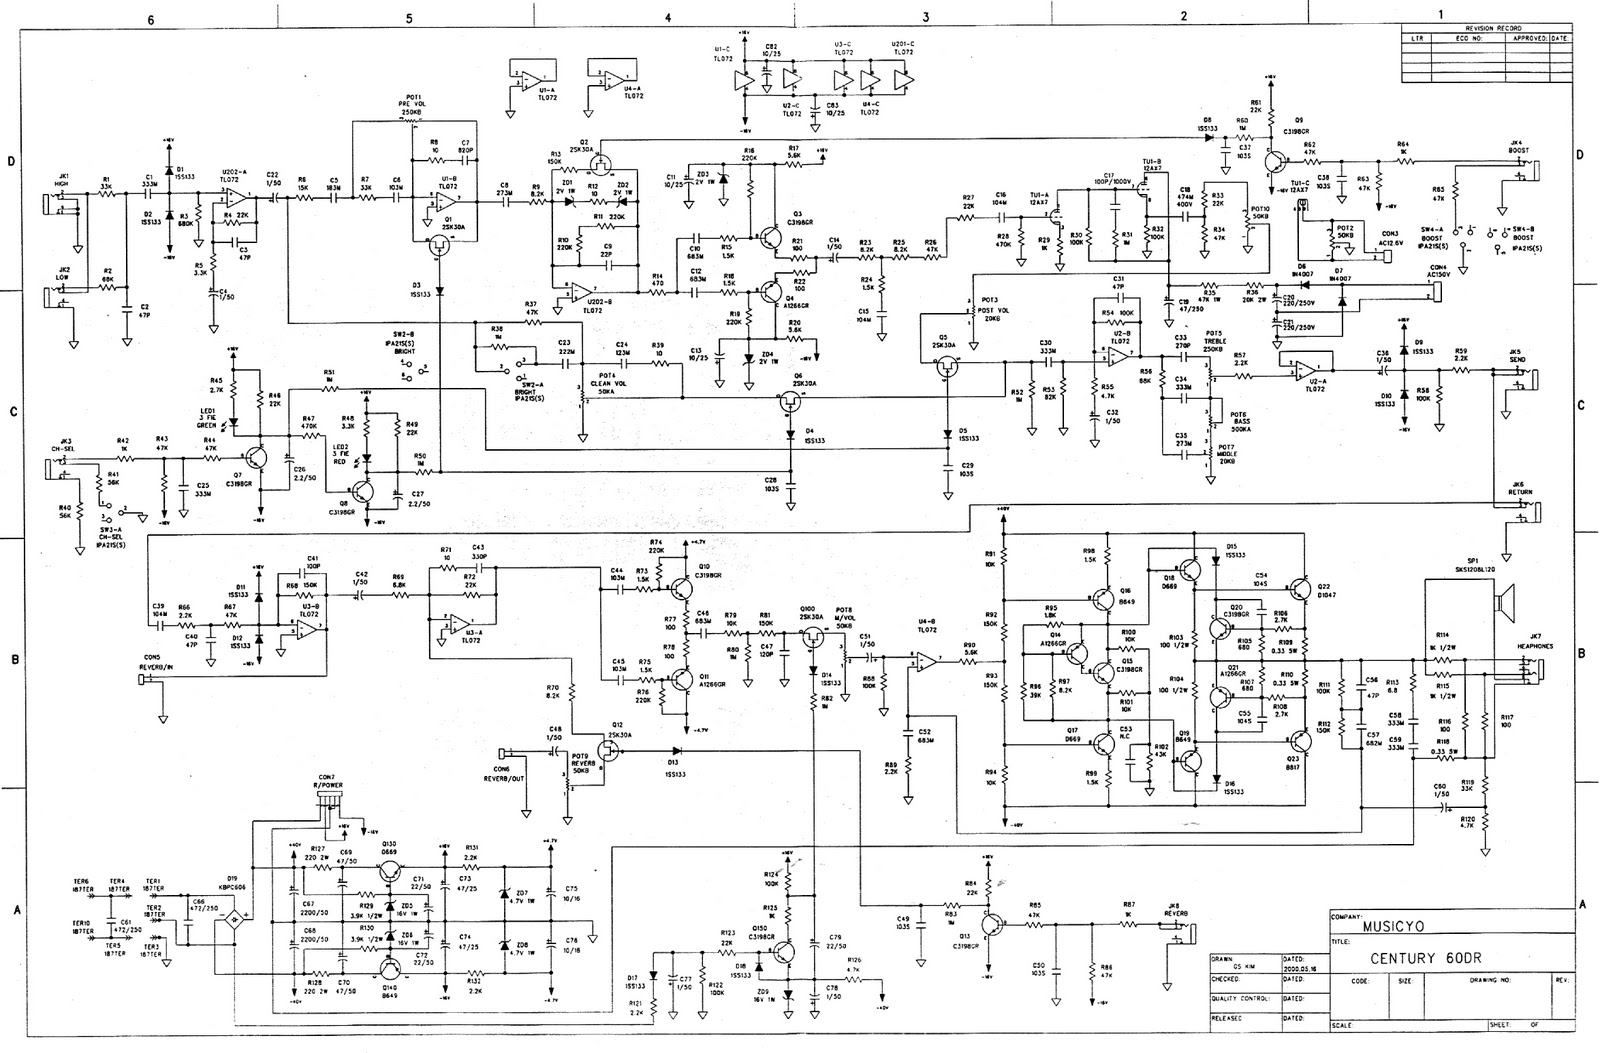 Welcome Schematic Electronic Diagram Electar Century 60dr Circuit Diagram